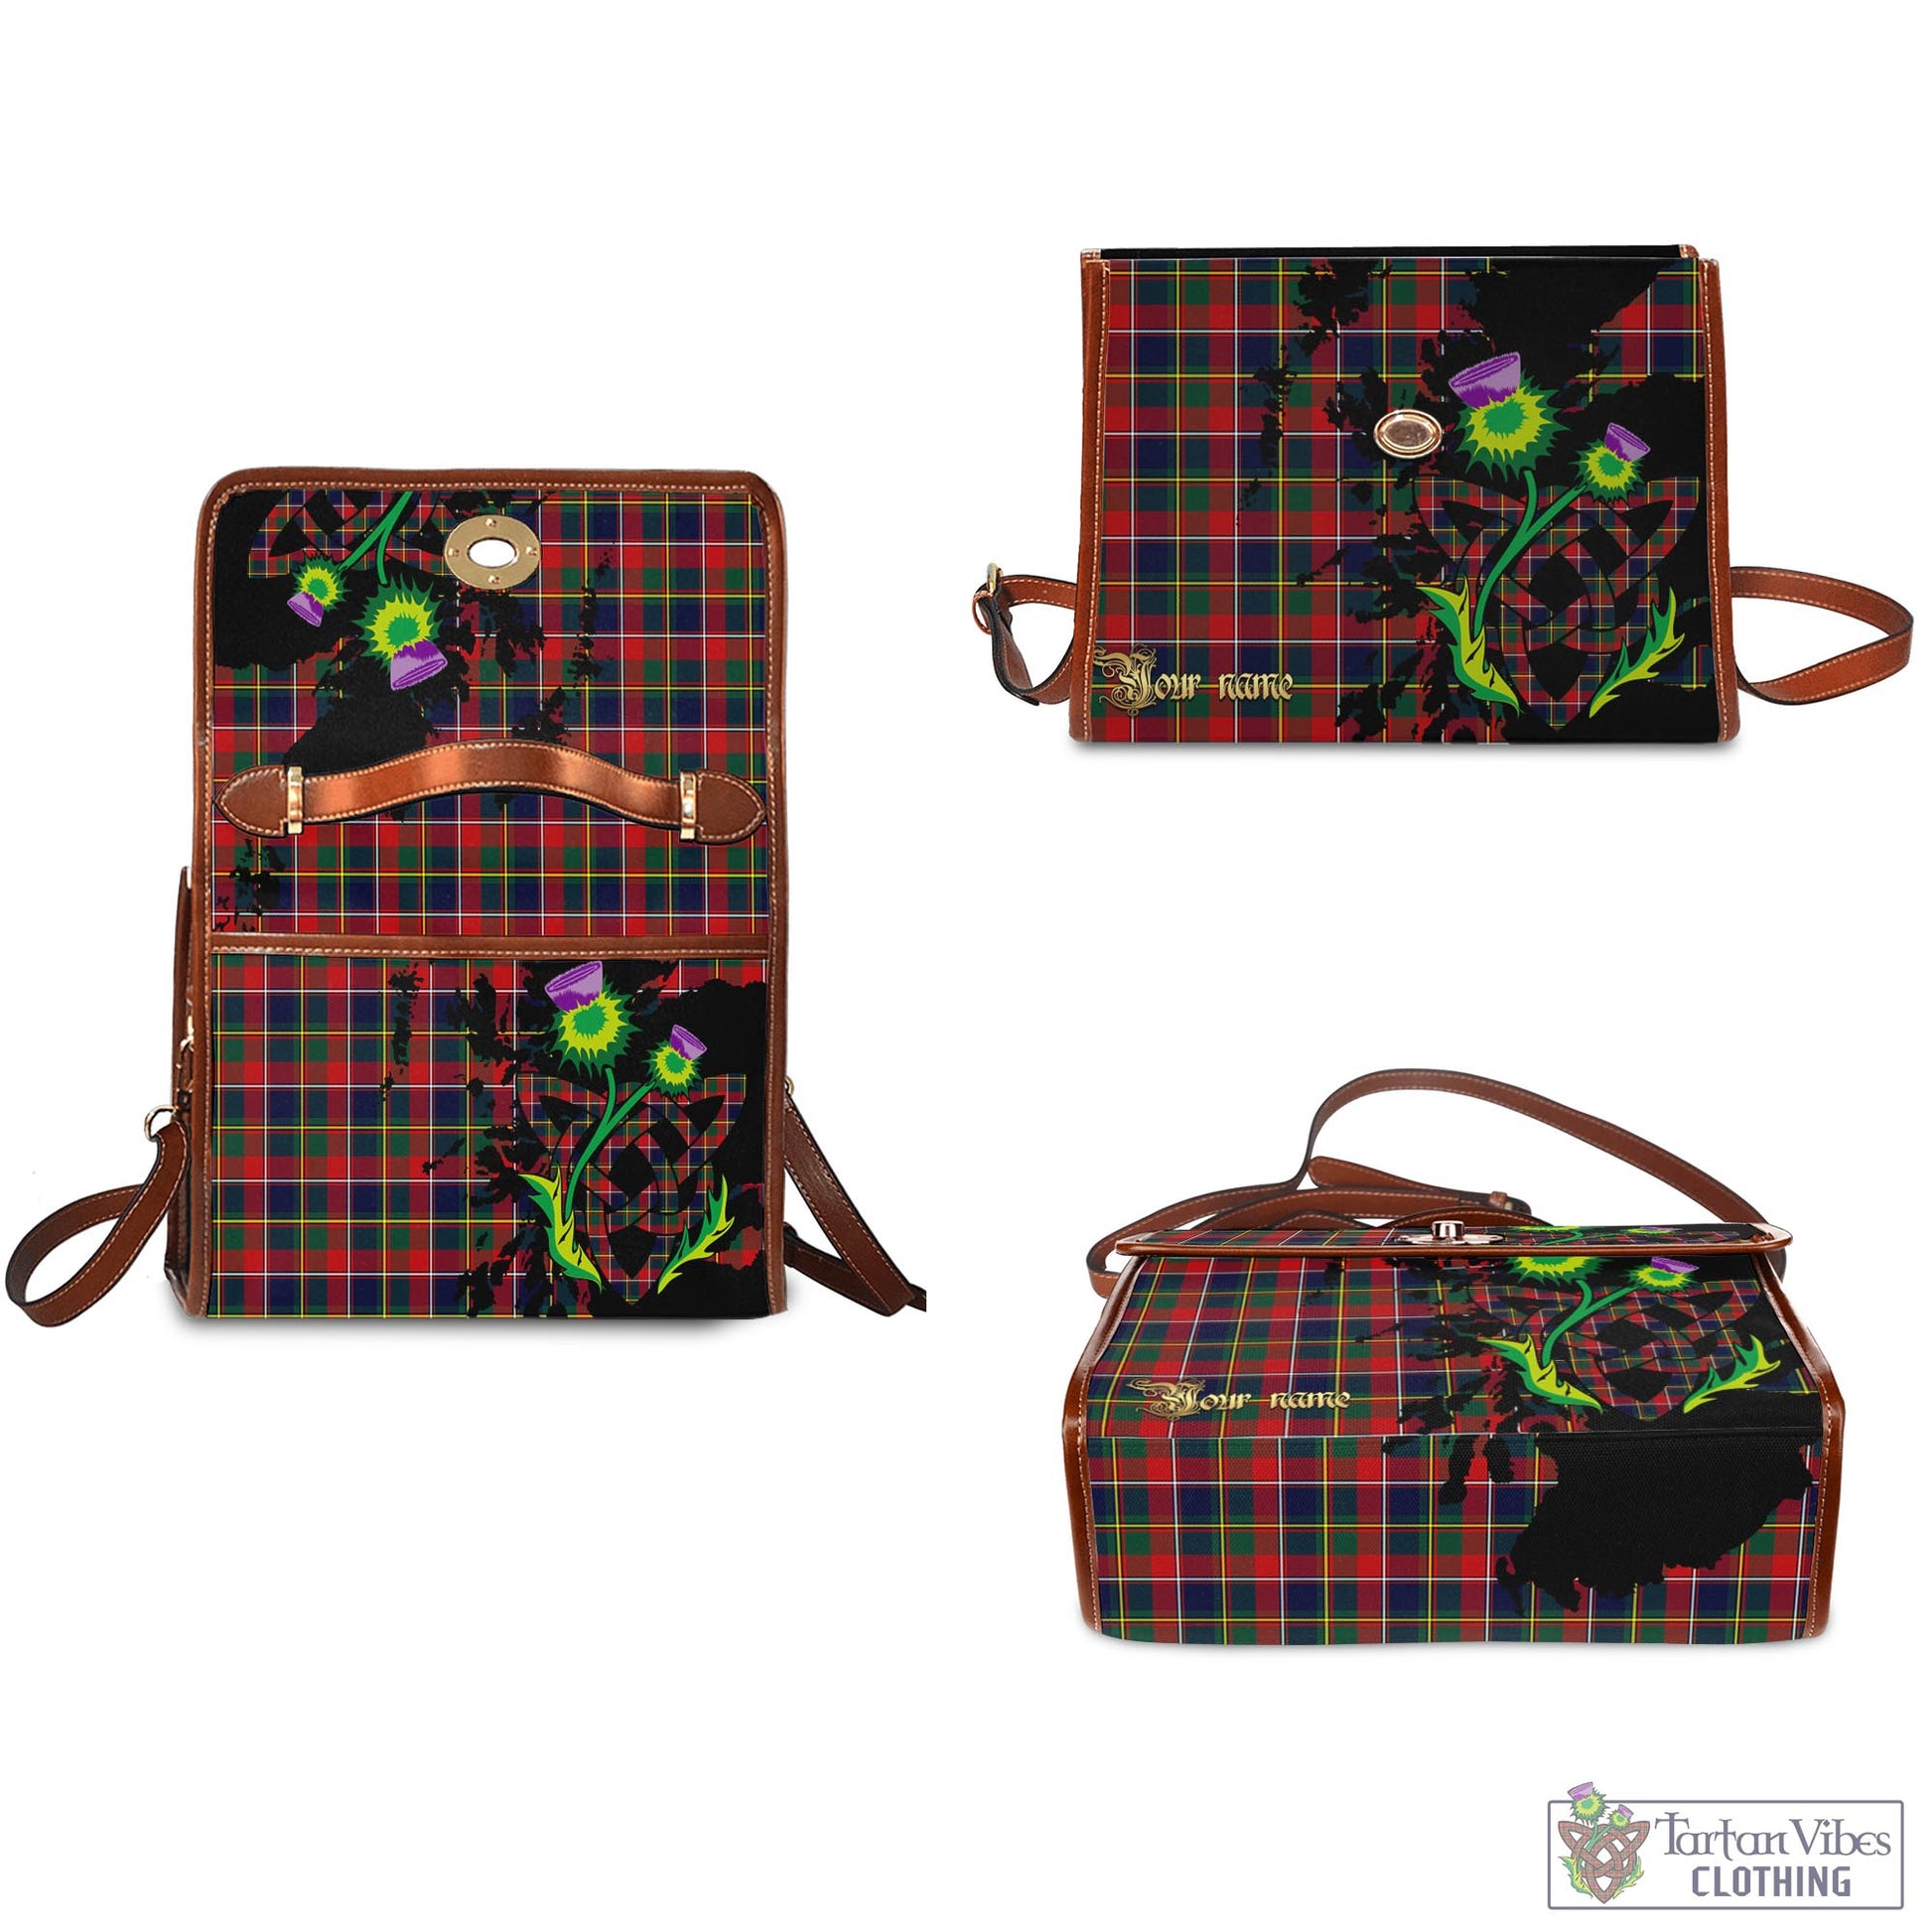 Tartan Vibes Clothing Quebec Province Canada Tartan Waterproof Canvas Bag with Scotland Map and Thistle Celtic Accents